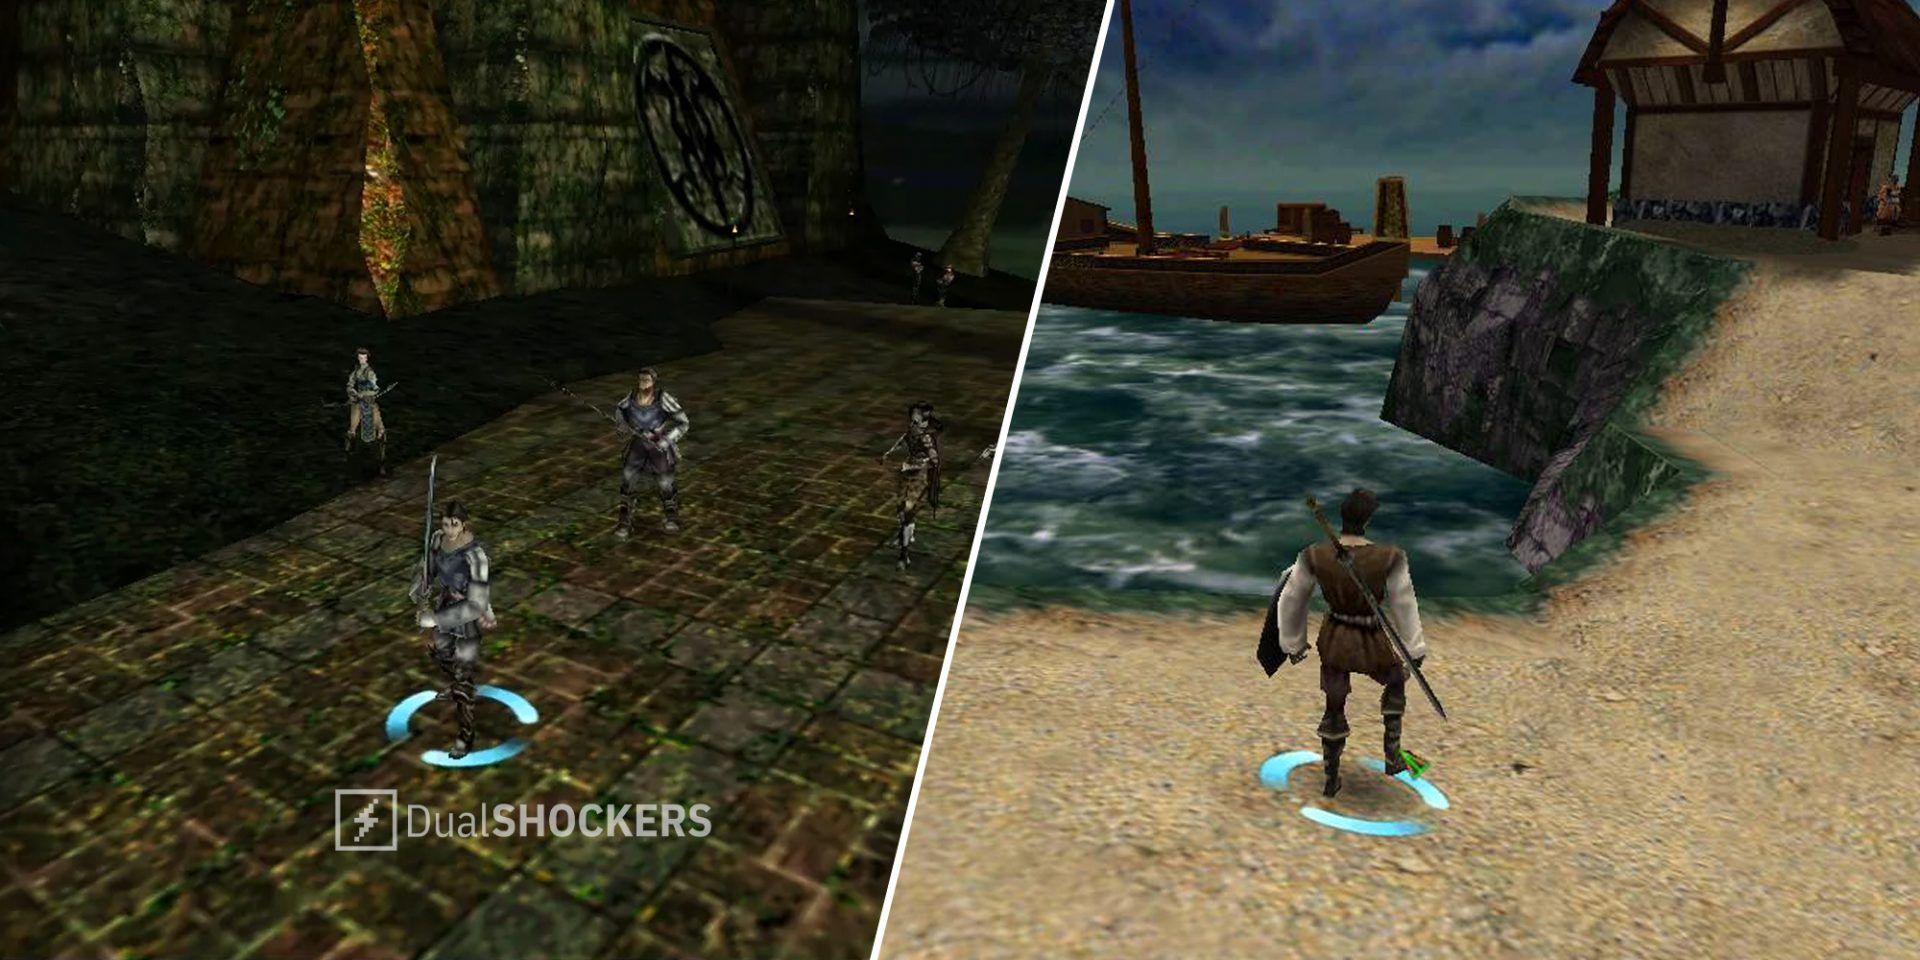 Summoner player facing enemies on left, Summoner player standing in front of the sea on right